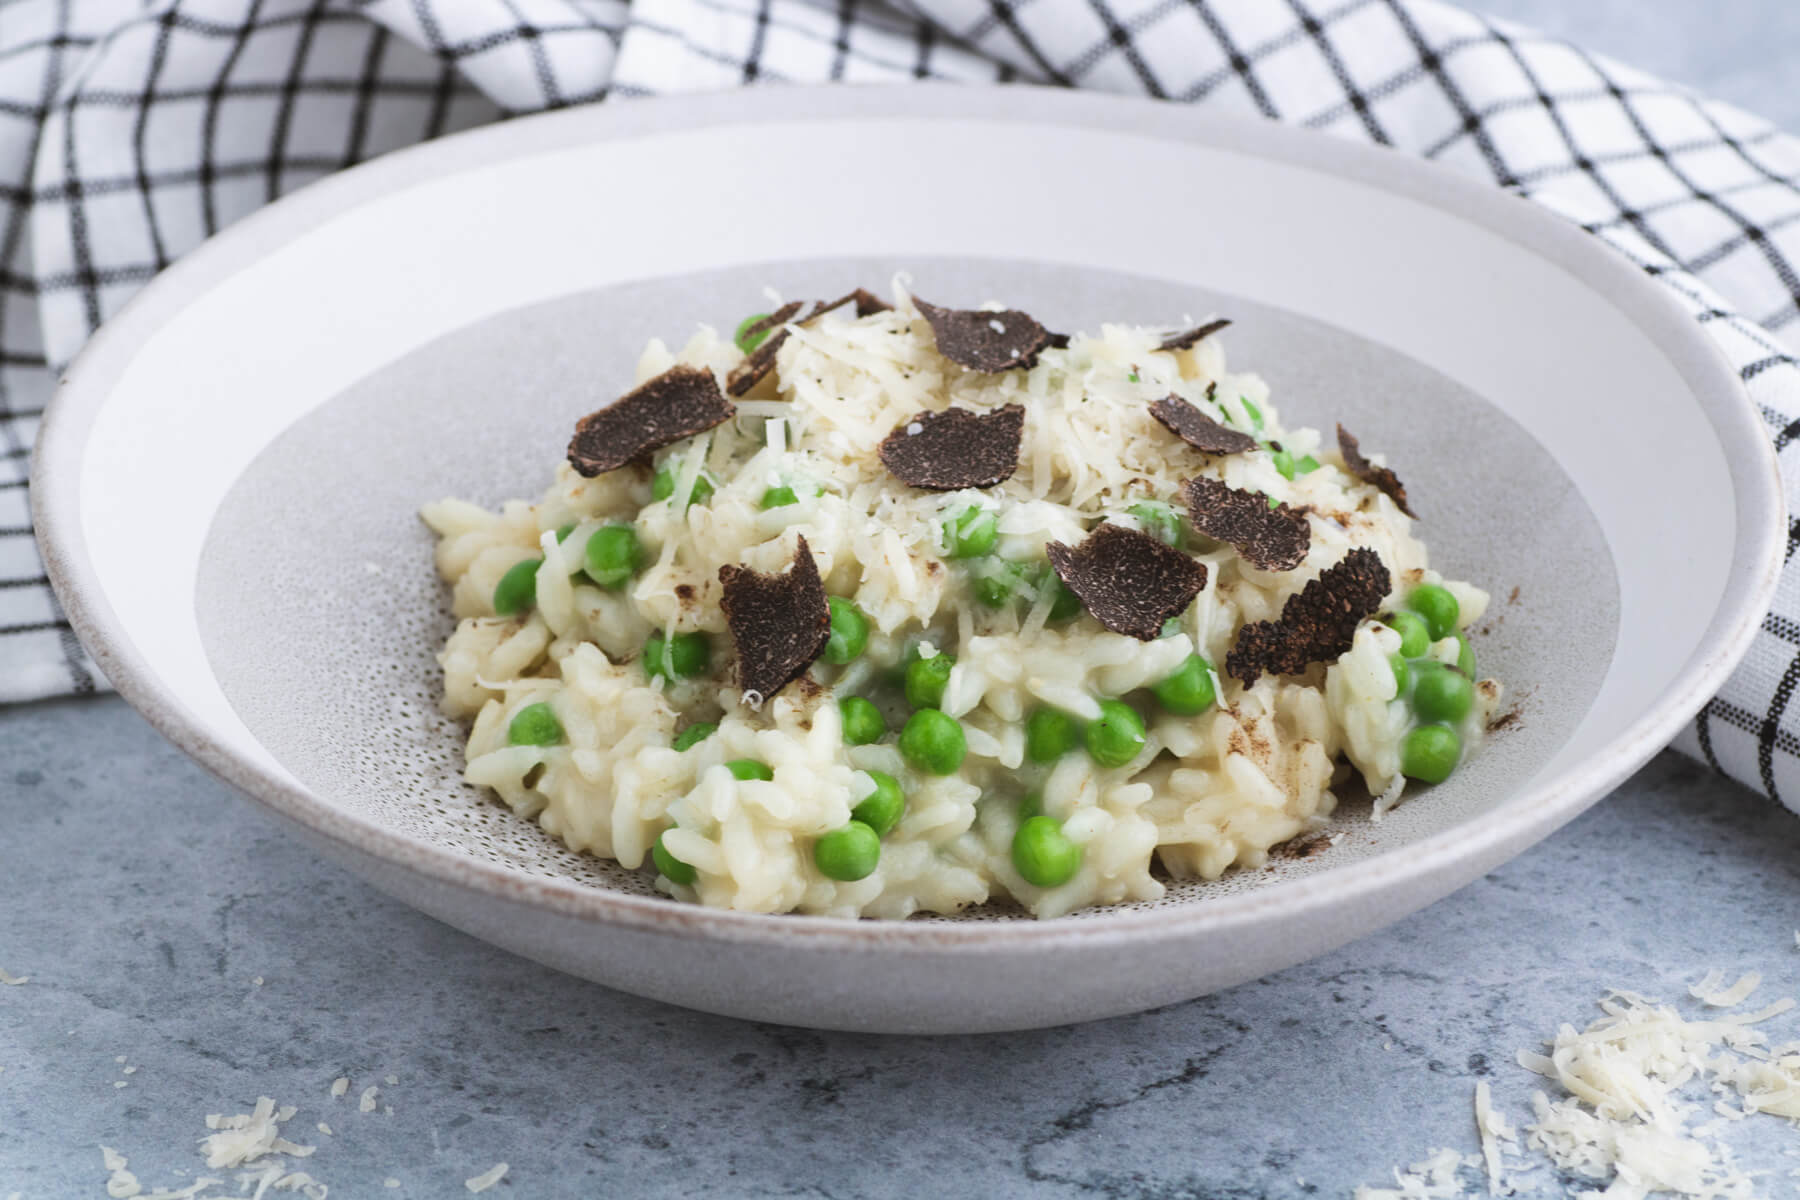 A stone bowl containing creamy truffle risotto studded with green peas and sliced winter truffle.